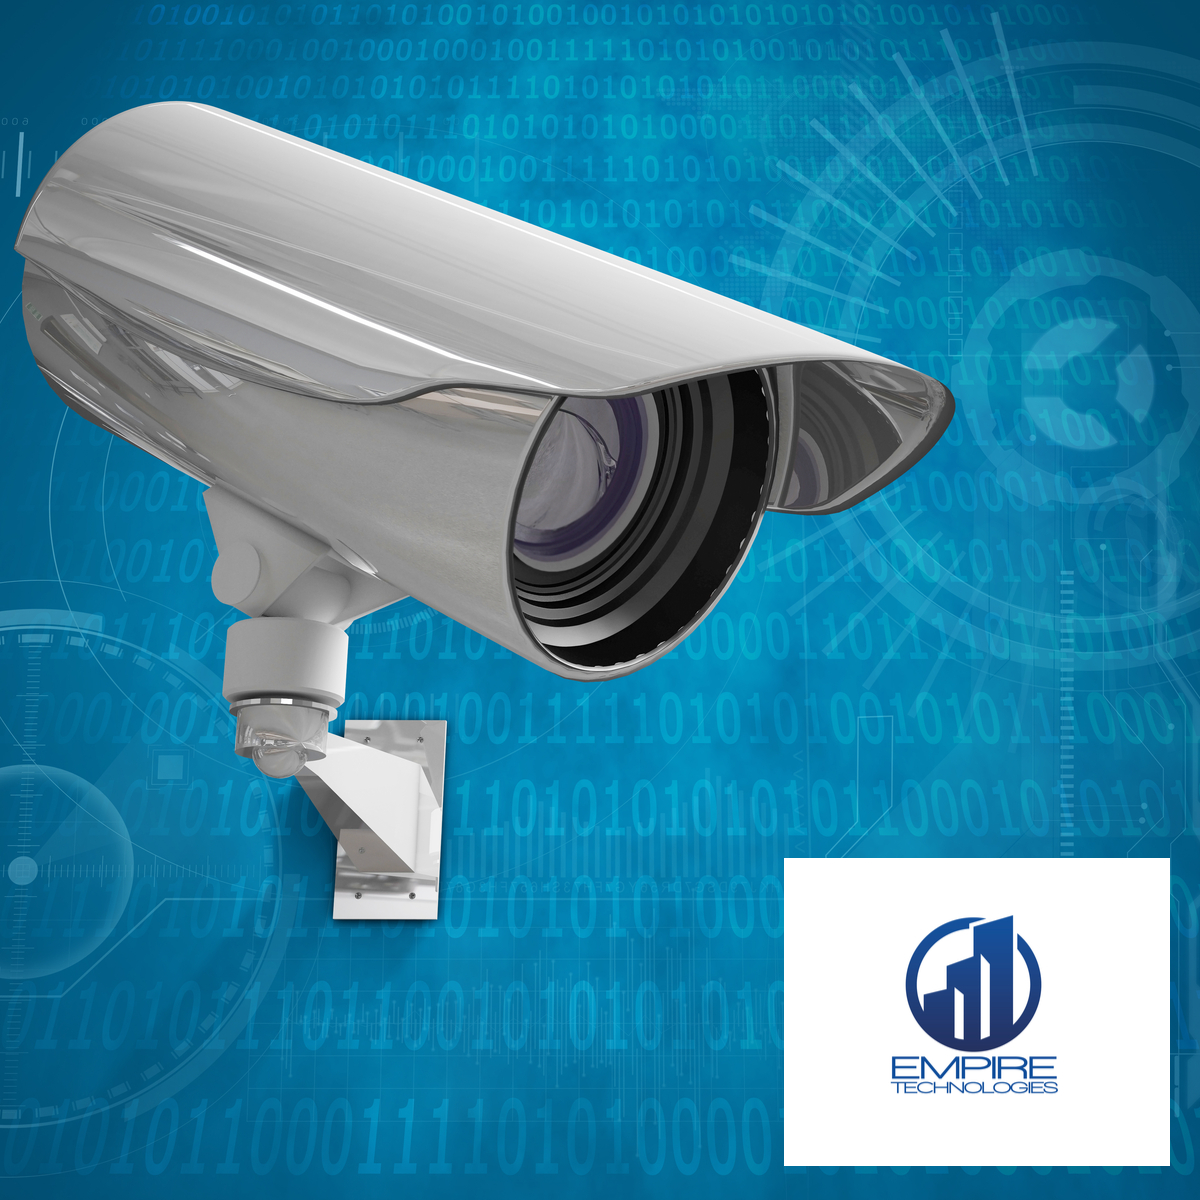 Get in Touch with Empire Technologies for Installation of Your Business Surveillance System!